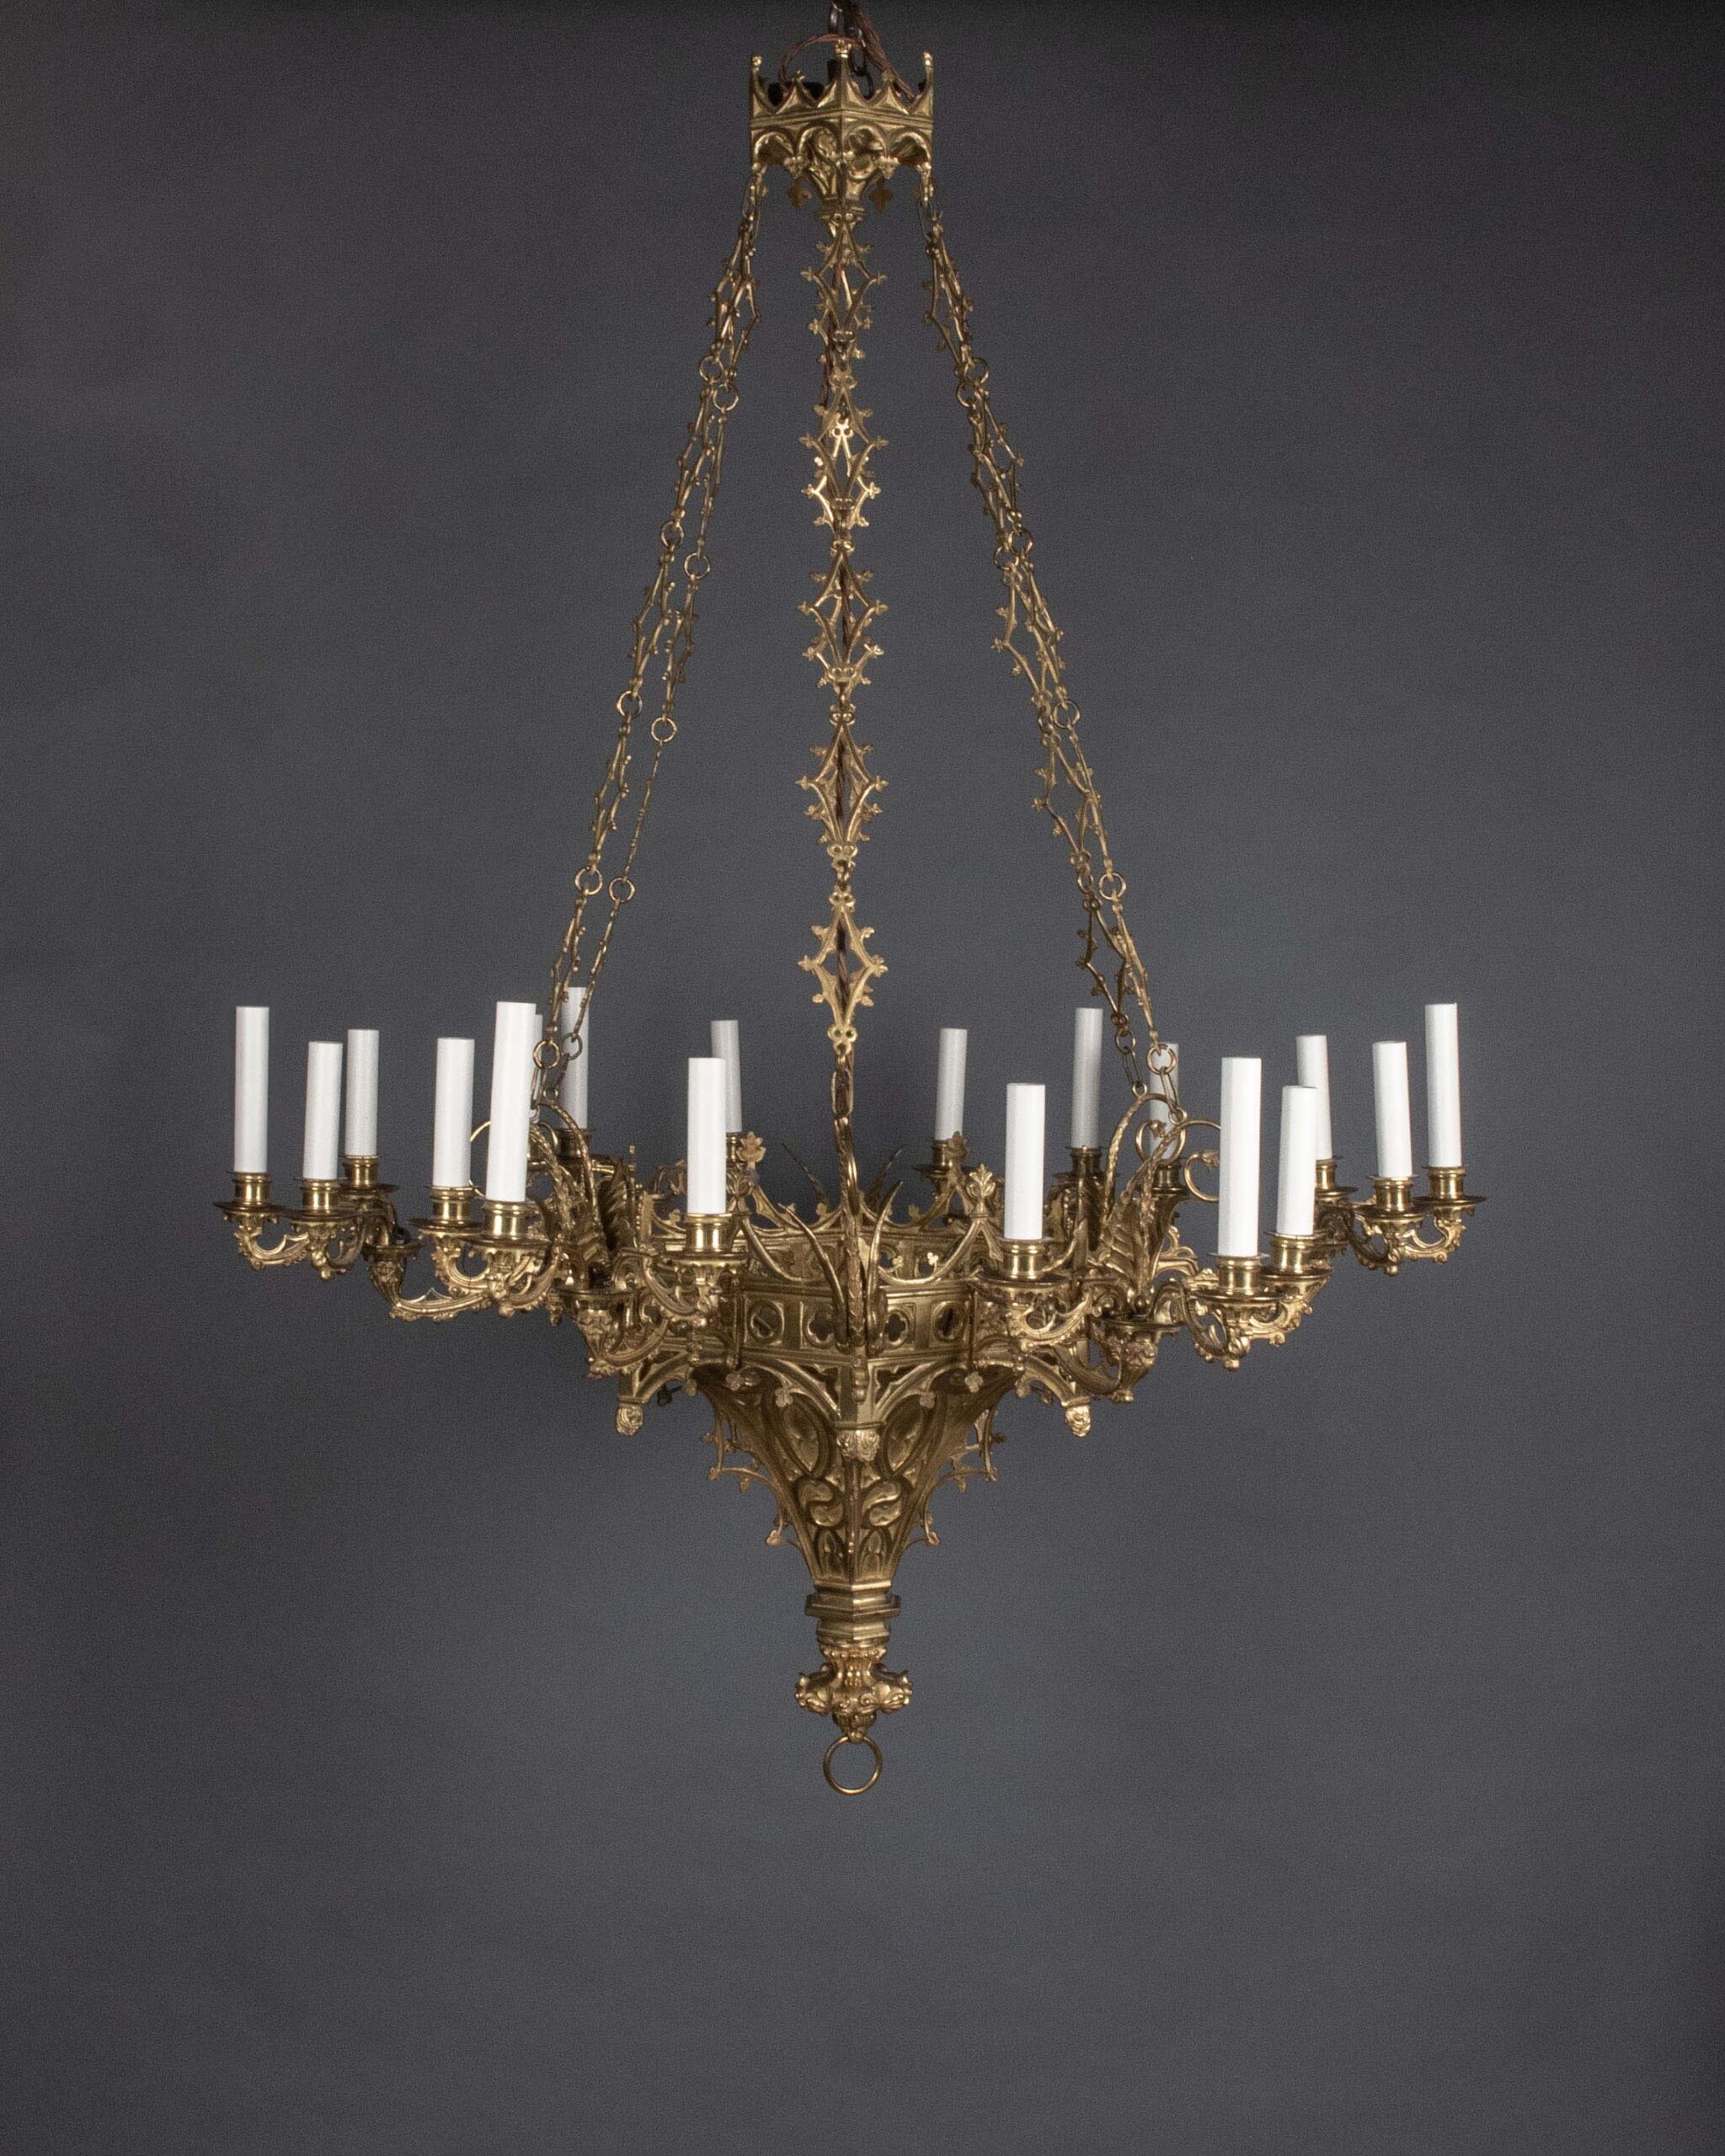 Magnificent gothic revival gilt chandelier on a grey background with multiple branches